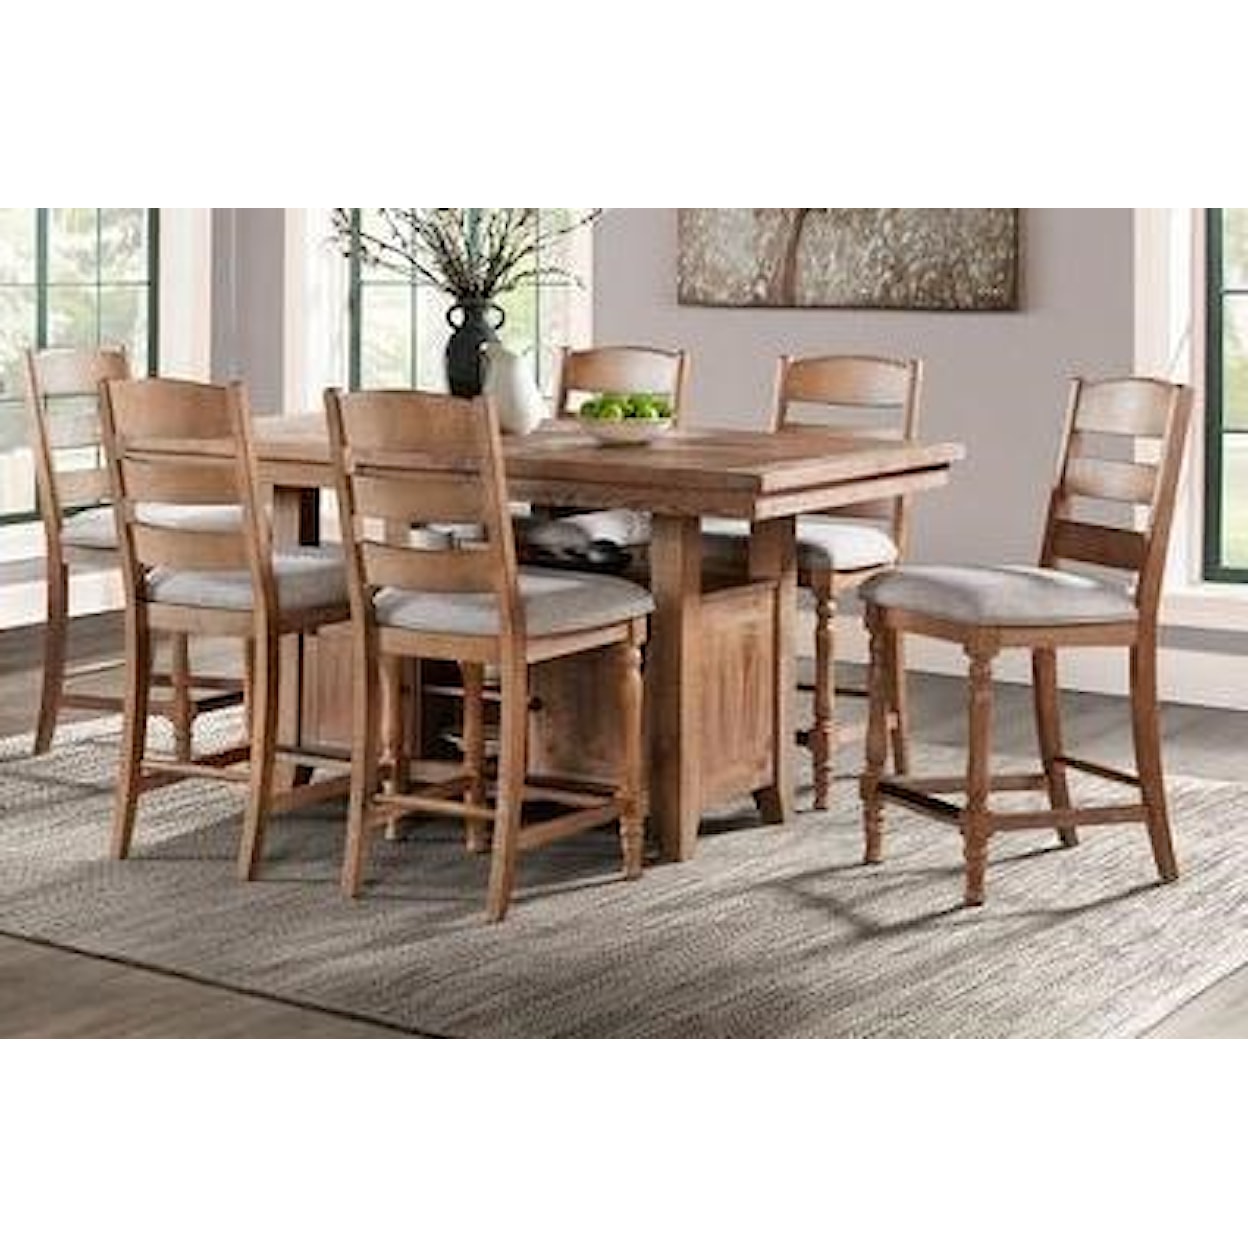 Belfort Select Hillgate 7-Piece Counter Height Table and Chair Set